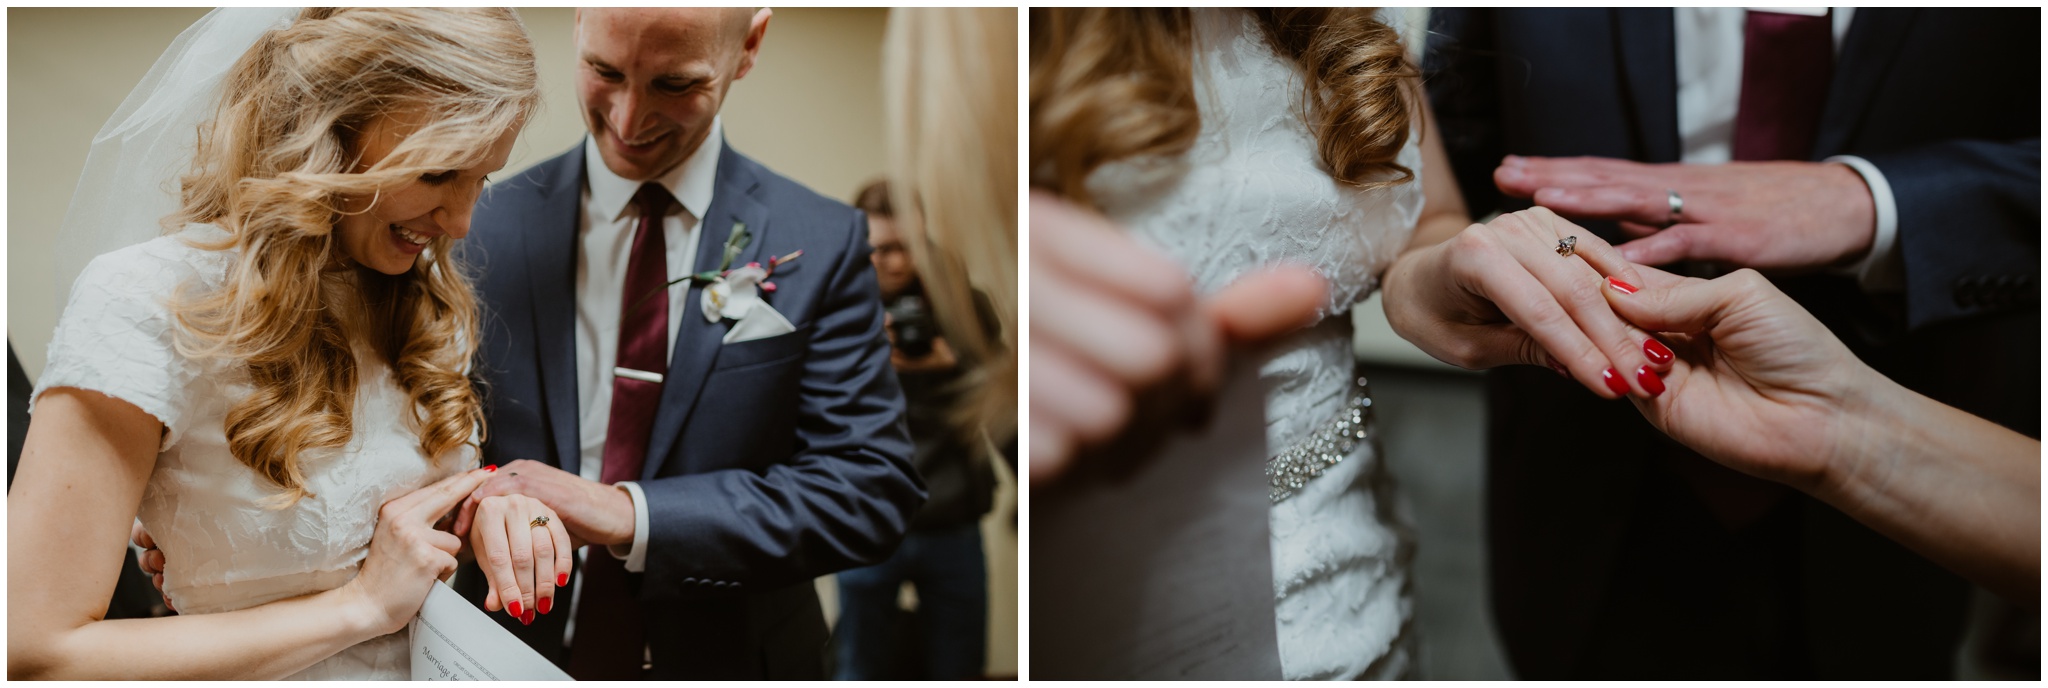 The Morros Chicago Wedding Photography Olga and Jeff Downtown Chicago City Hall Elopement_0032.jpg